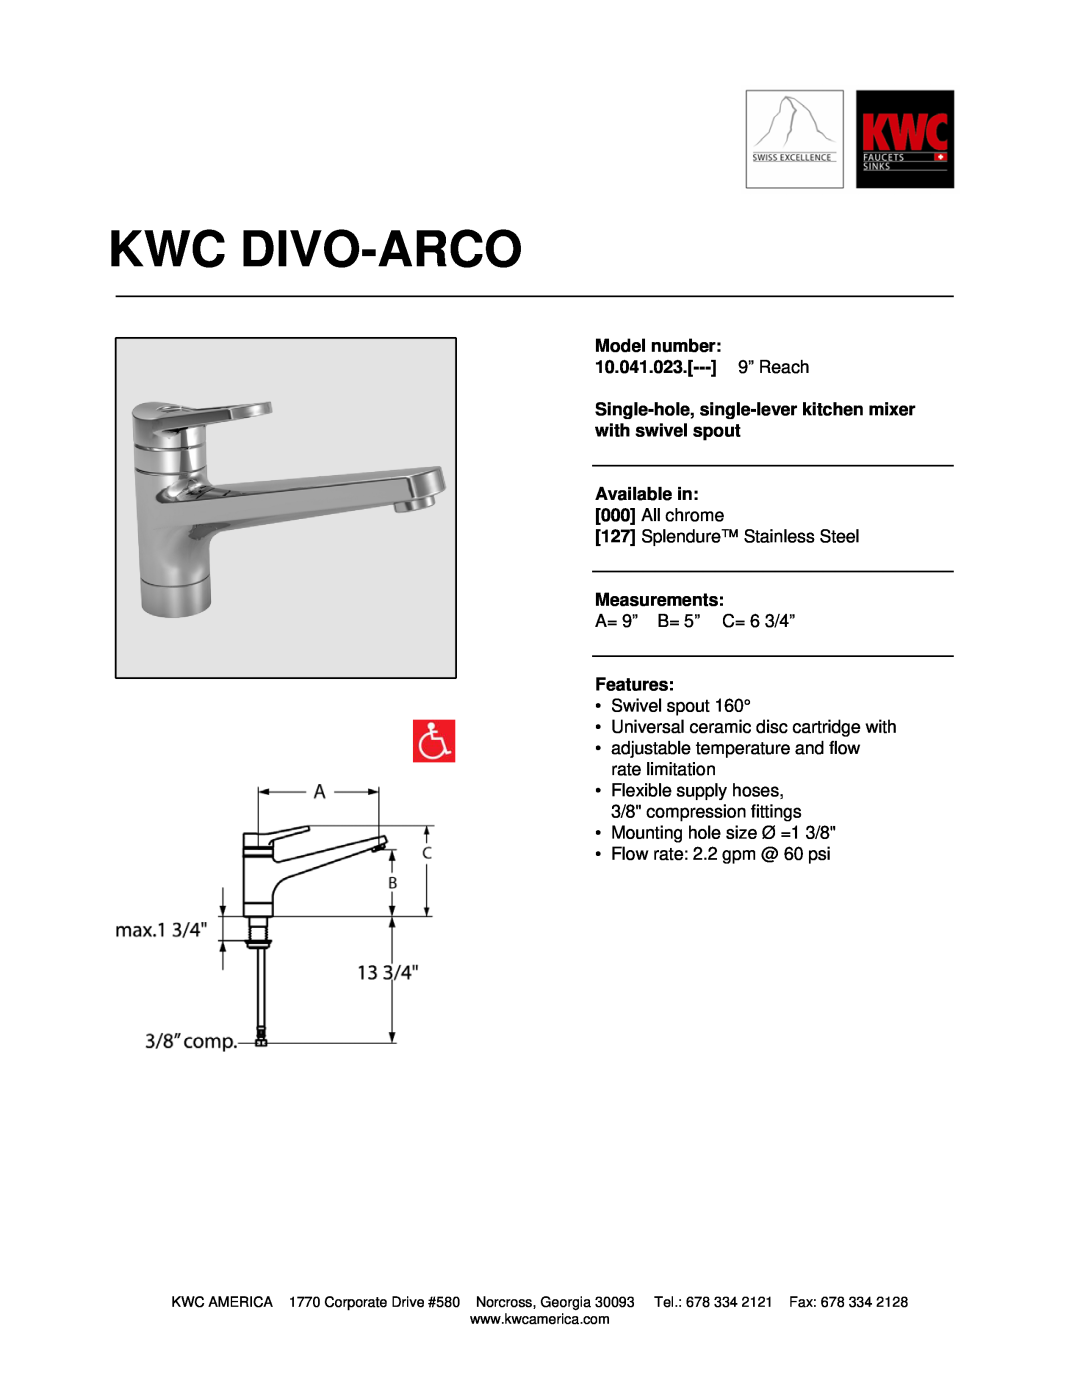 KWC manual Kwc Divo-Arco, Model number 10.041.023.--- 9” Reach, Available in, Measurements, Features 